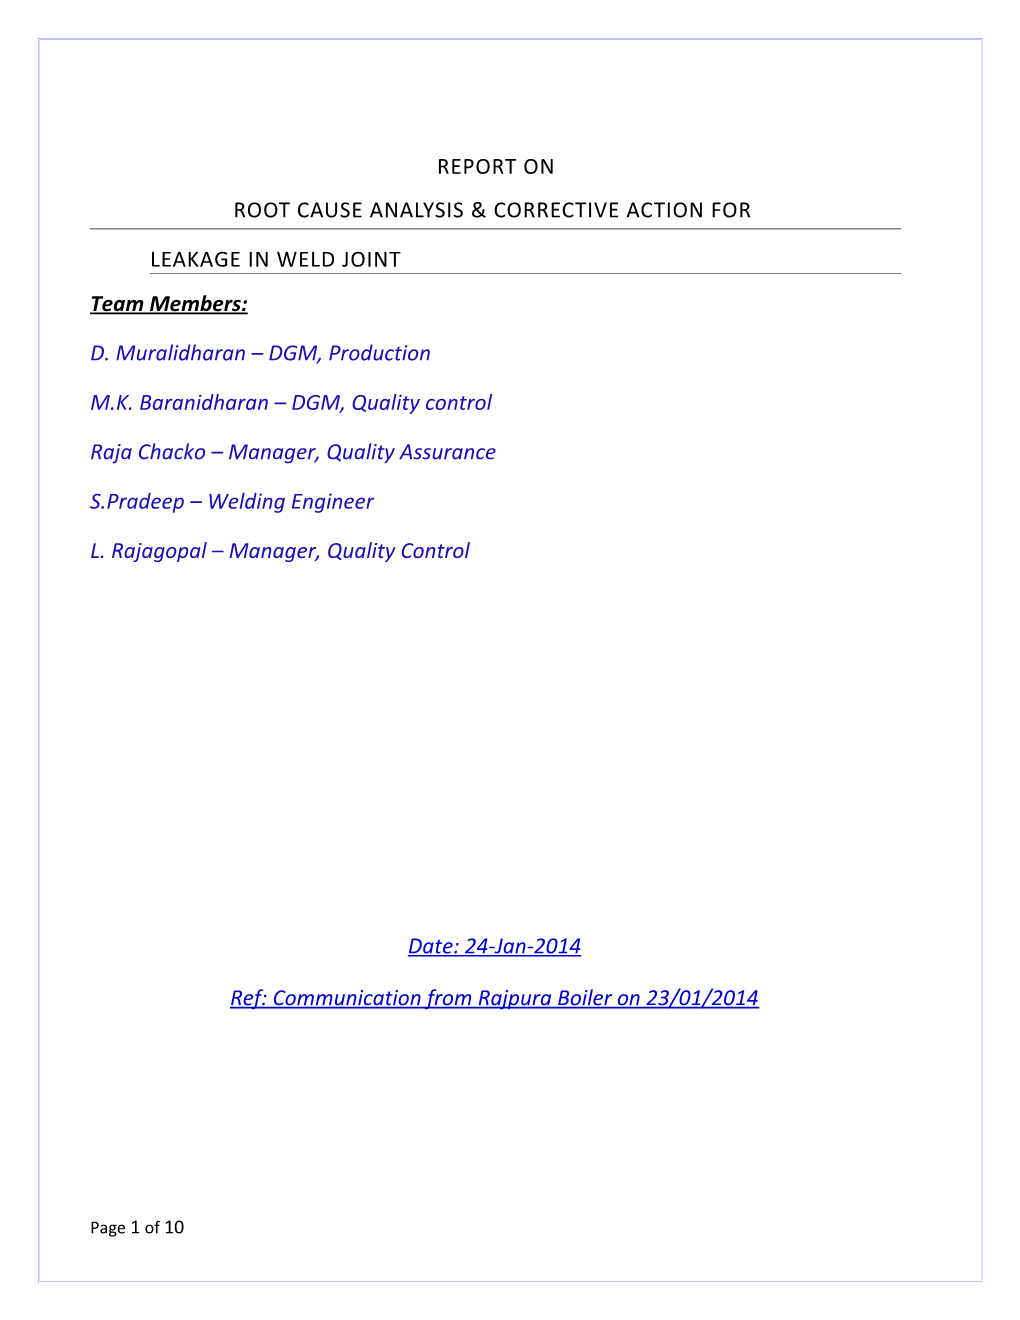 Root Cause Analysis& Corrective Action For